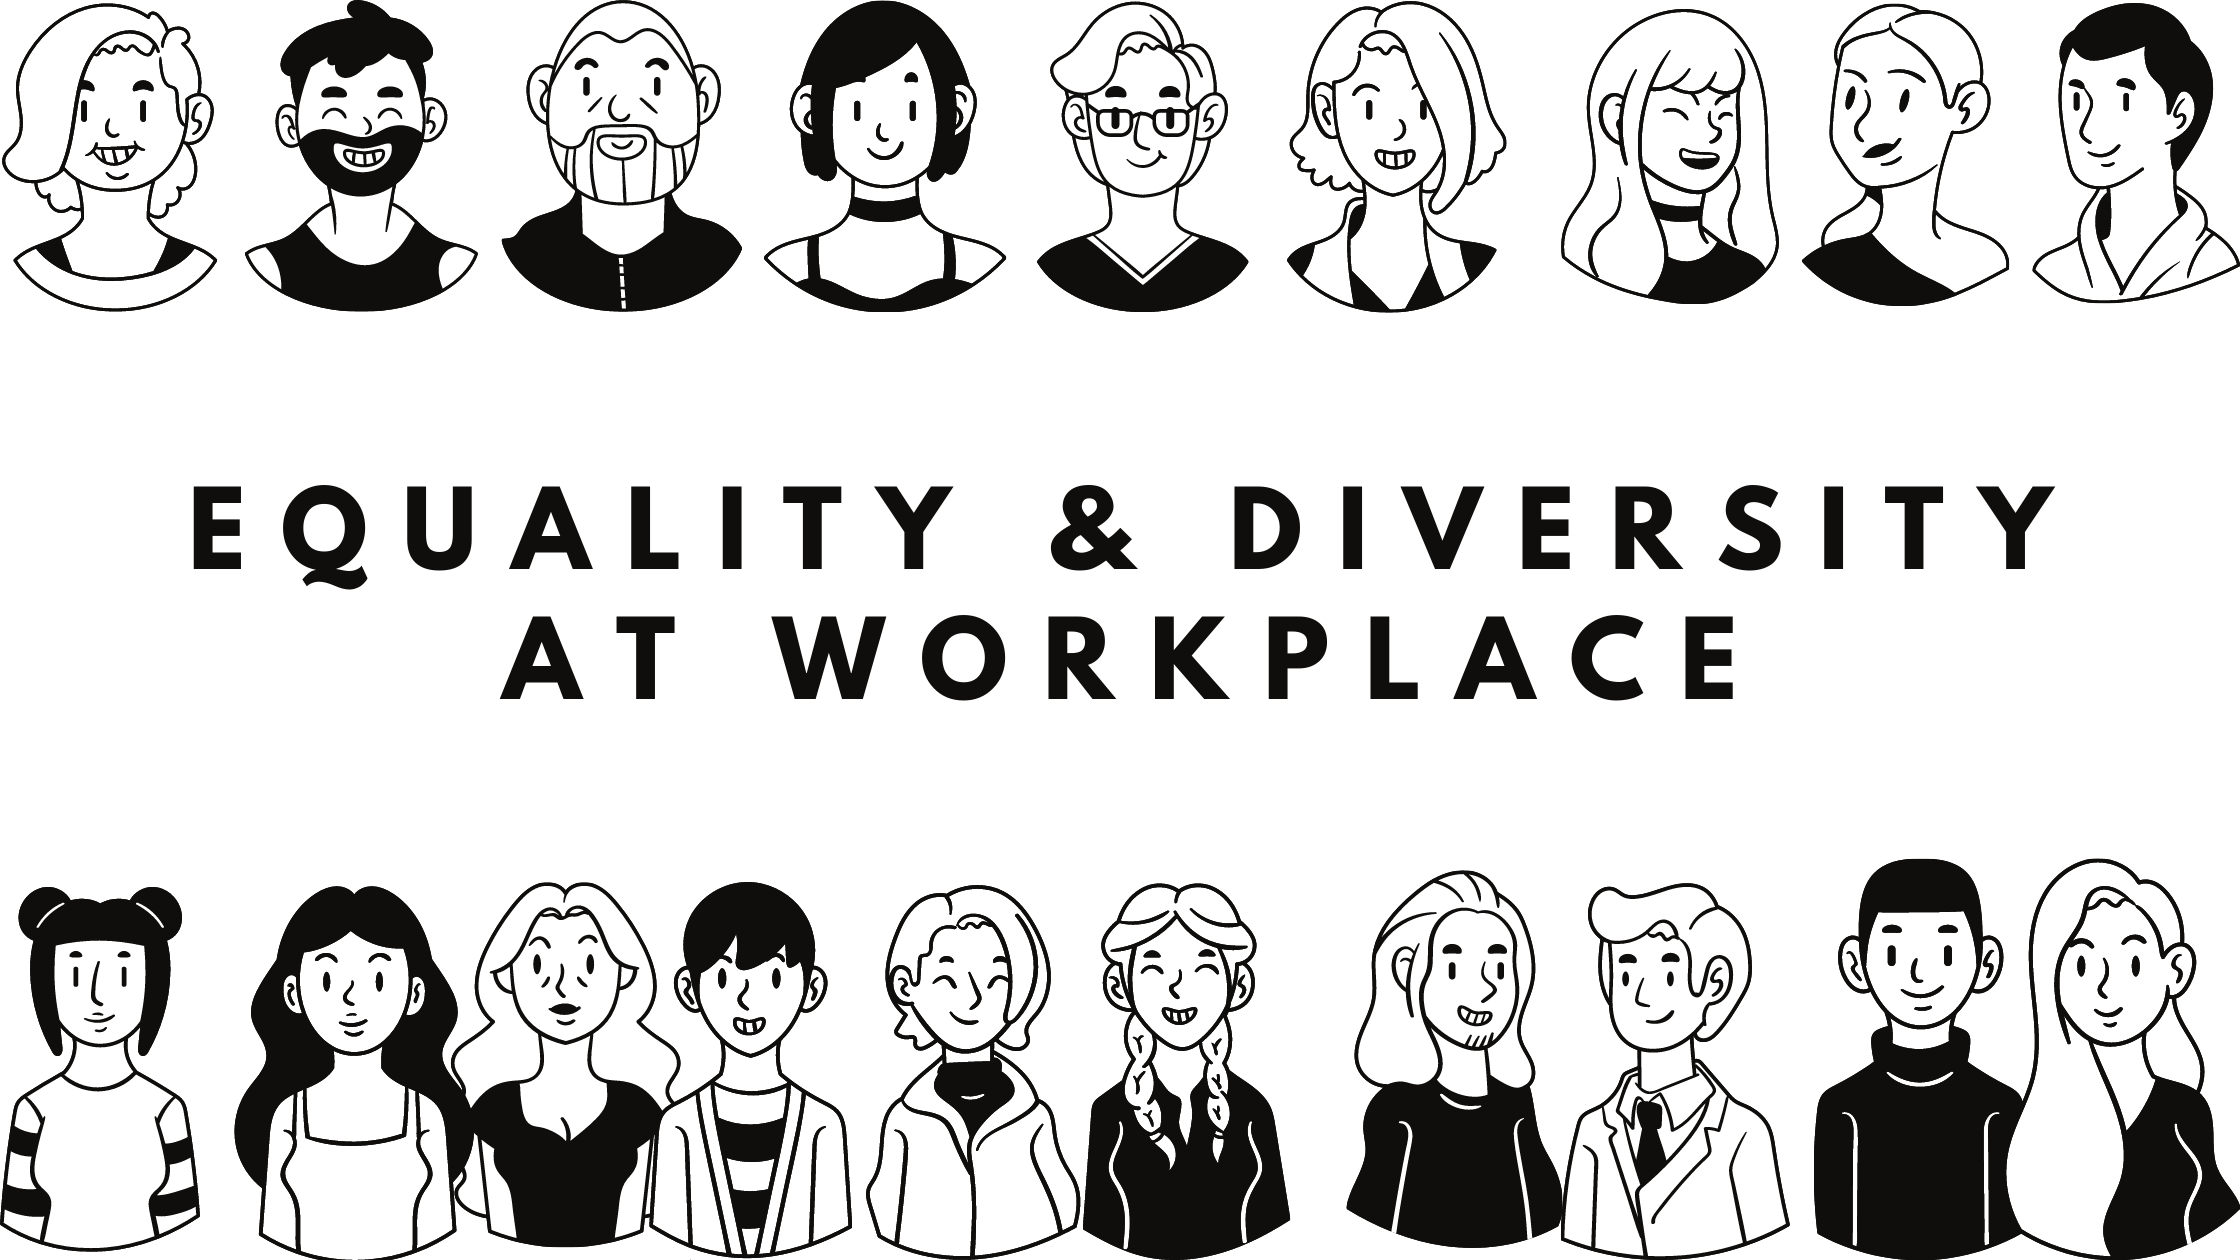 How to Promote Equality and Diversity in the Workplace_